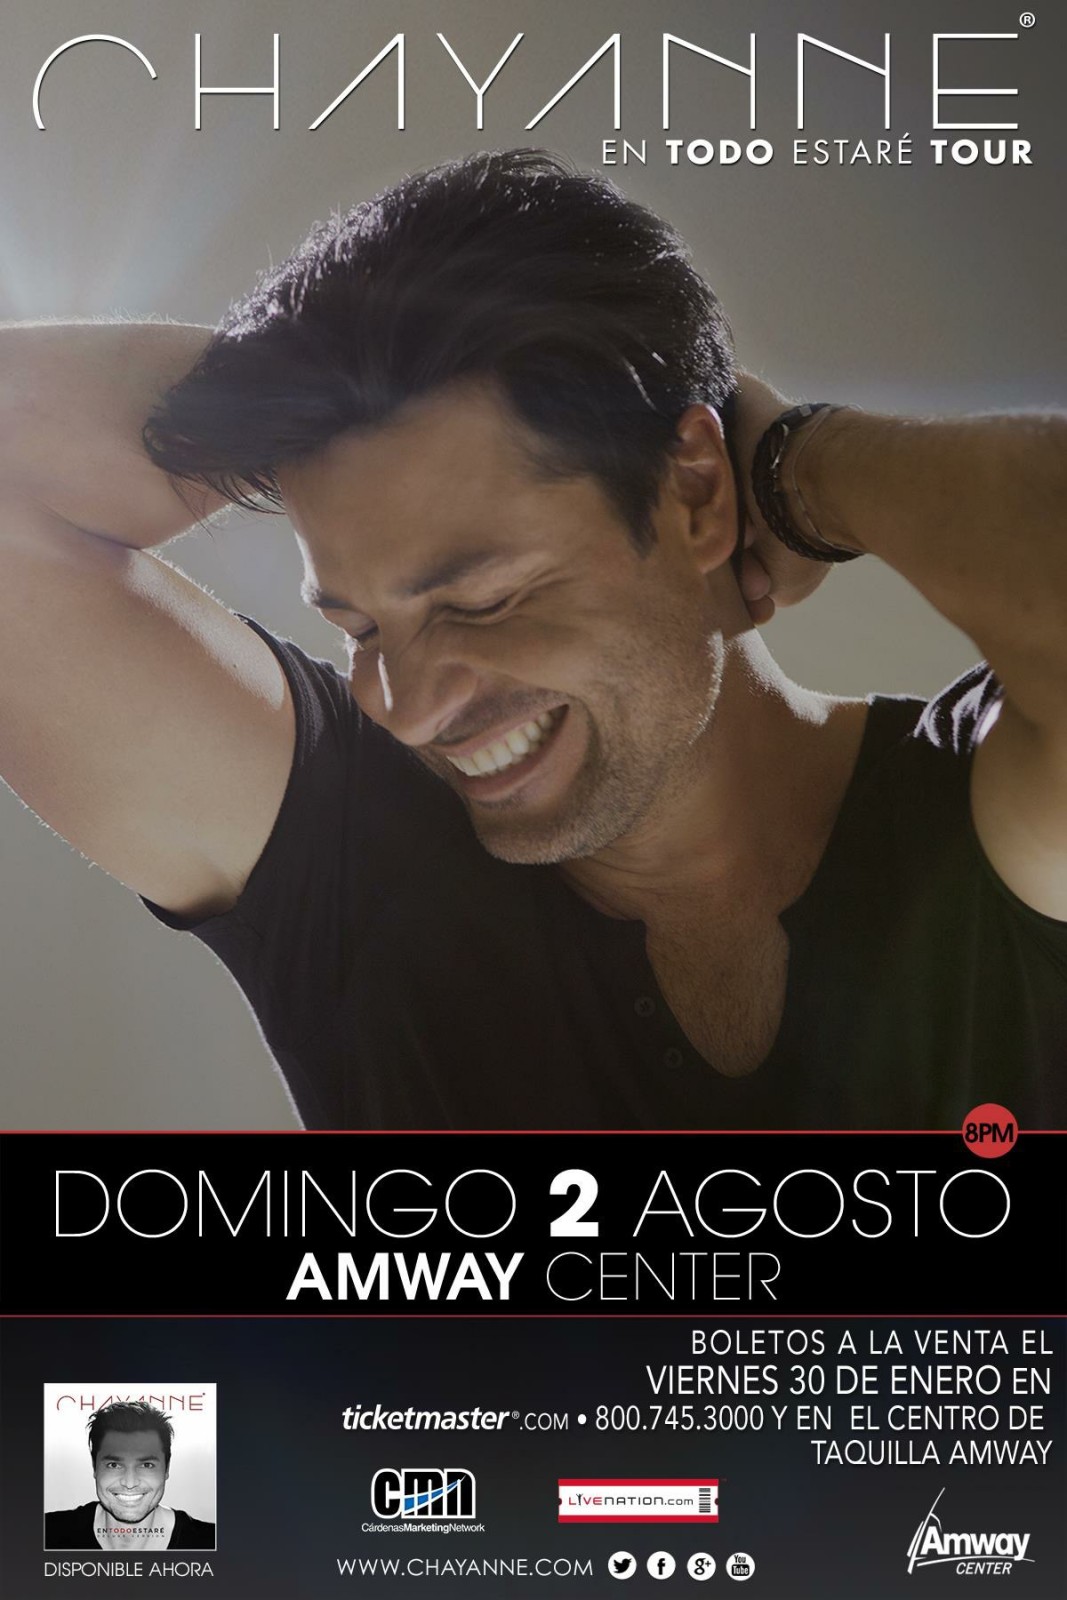 Chayanne at Amway Center